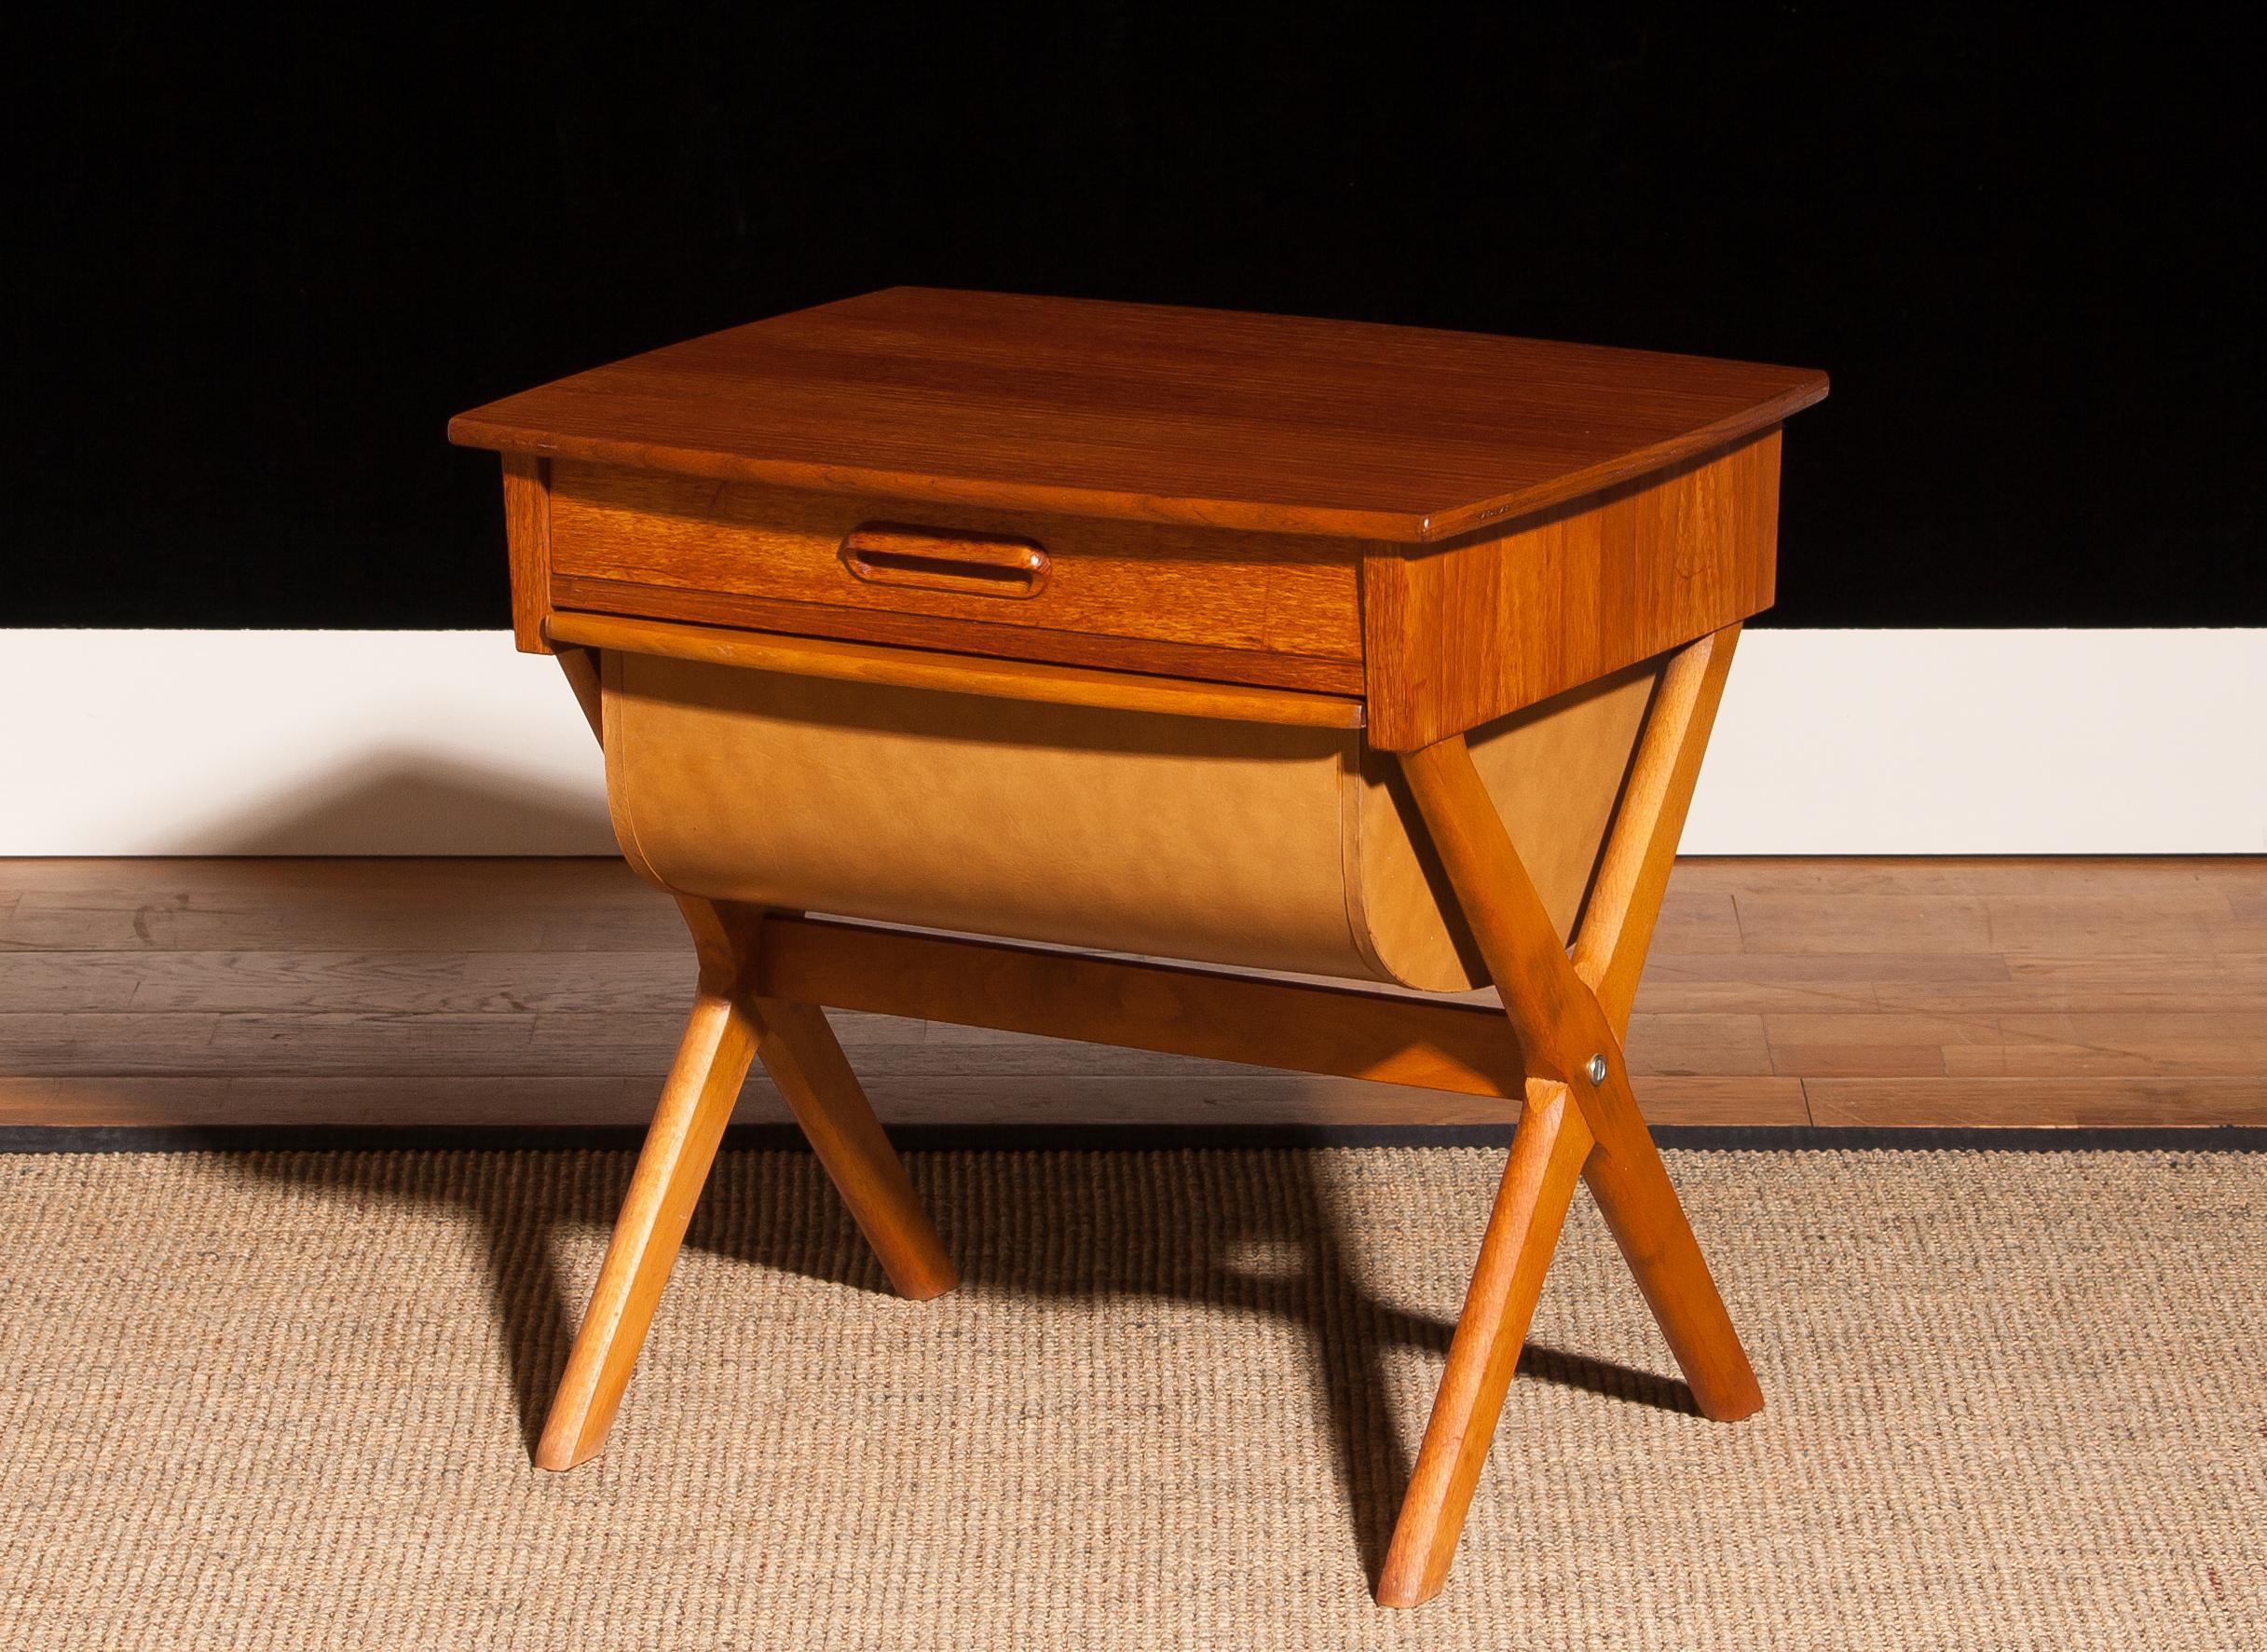 Very nice sewing table made in Sweden.
This table is made of teak and has one normal drawer and one deep drawer.
It is in a beautiful condition.
Period 1960s.
Dimensions: H 52 cm, W 52 cm, D 45 cm.